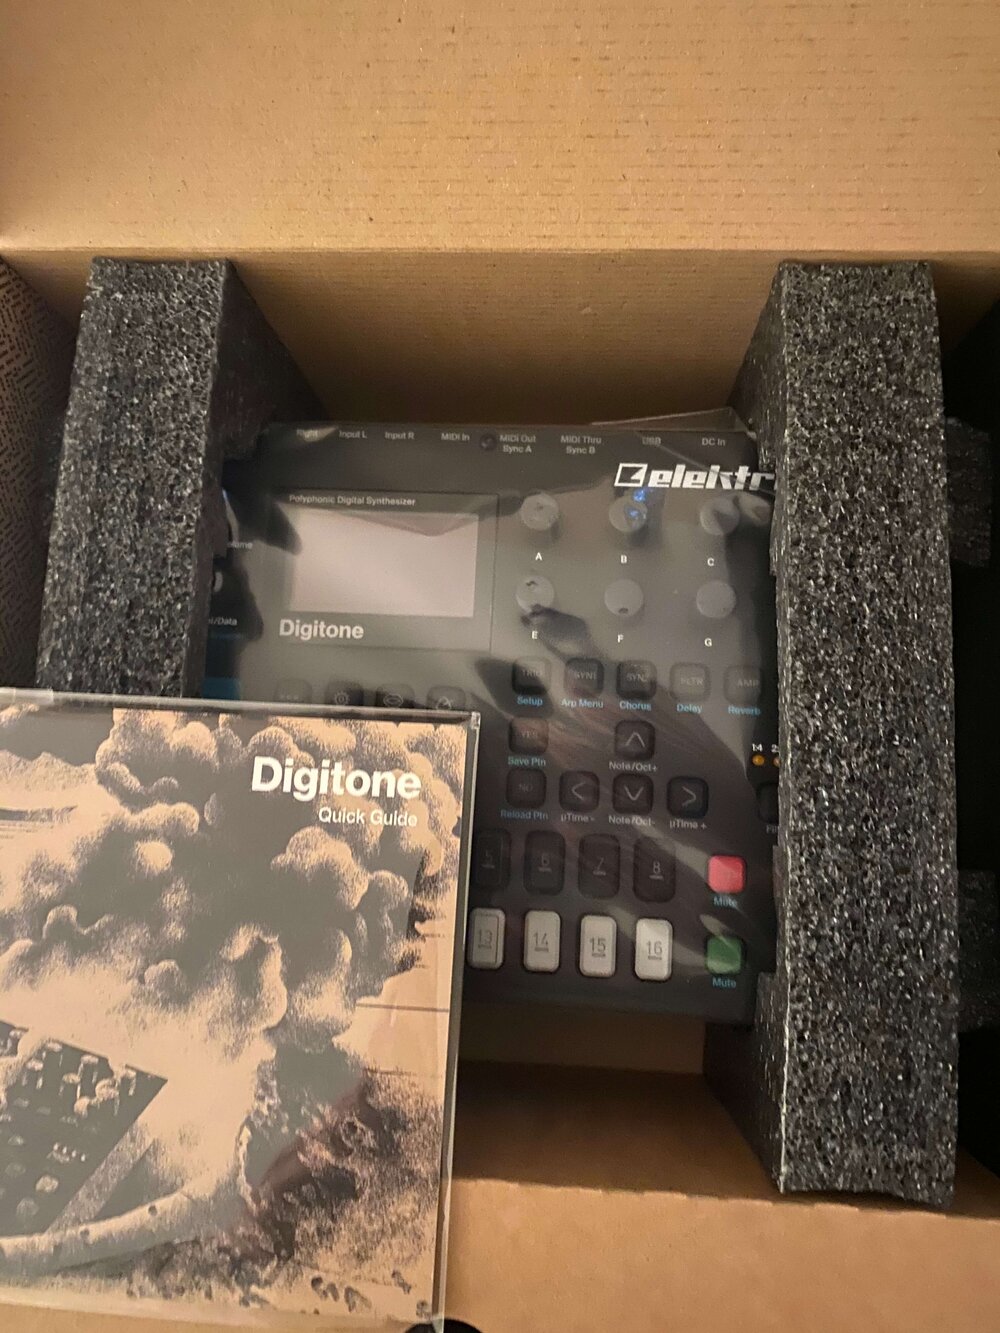 The Elektron Digitone came just in time